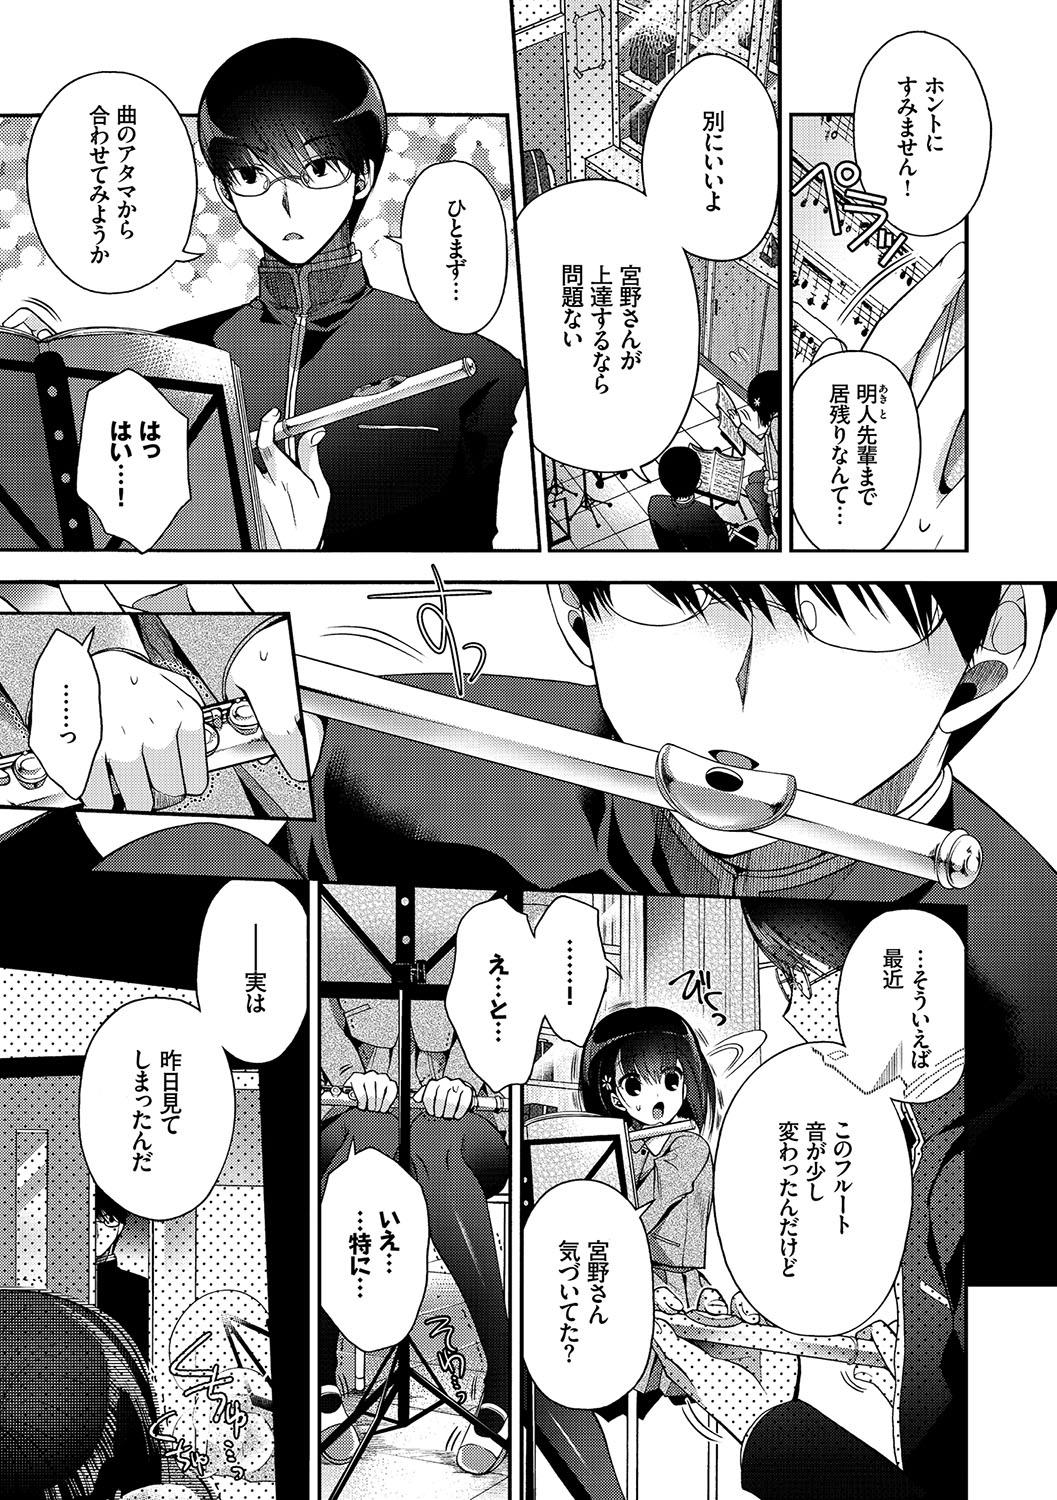 Gangbang Hatsukoi Melty - Melty First Love Wild - Page 6